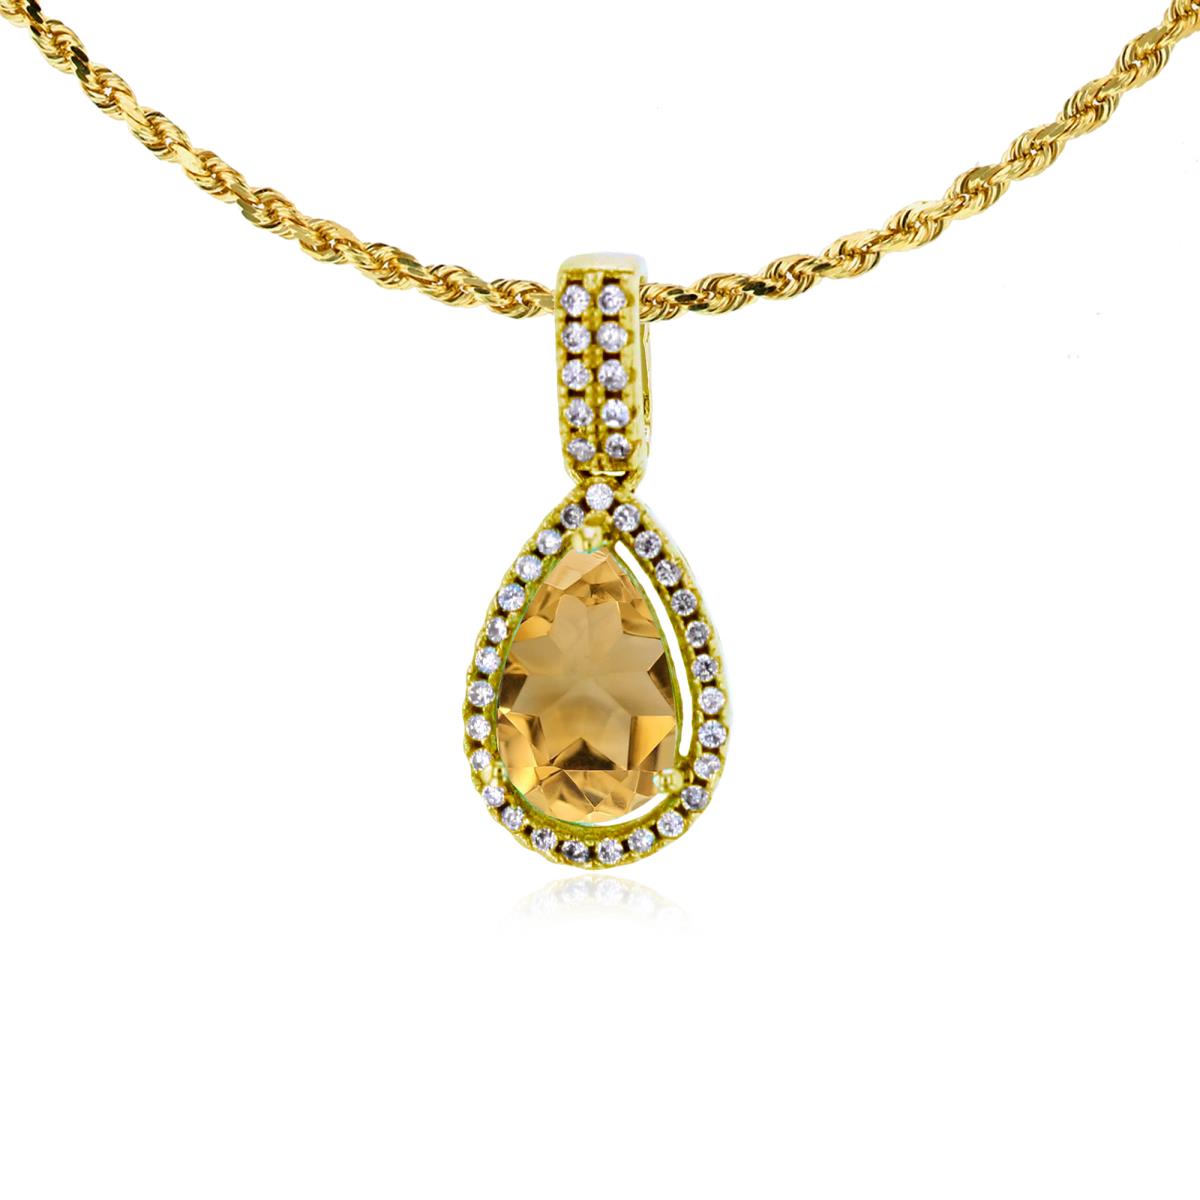 10K Yellow Gold 8x5mm Pear Cut Citrine & 0.11 CTTW Diamond Halo 18" Rope Chain Necklace